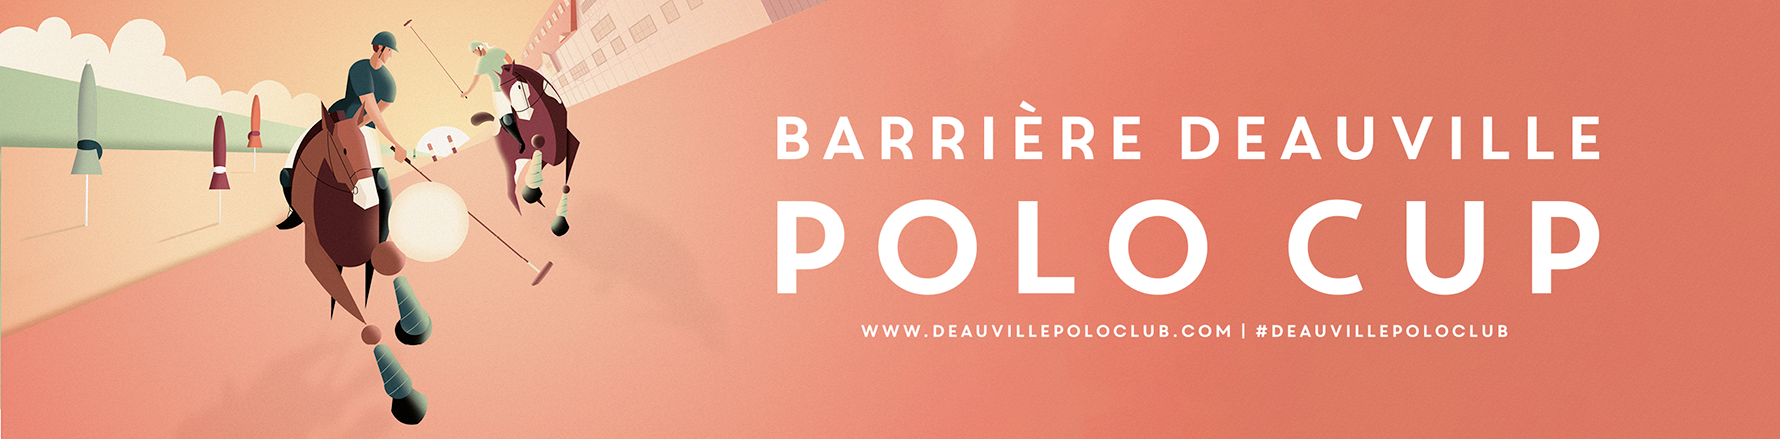 Barriere Deauville Polo Cup logo